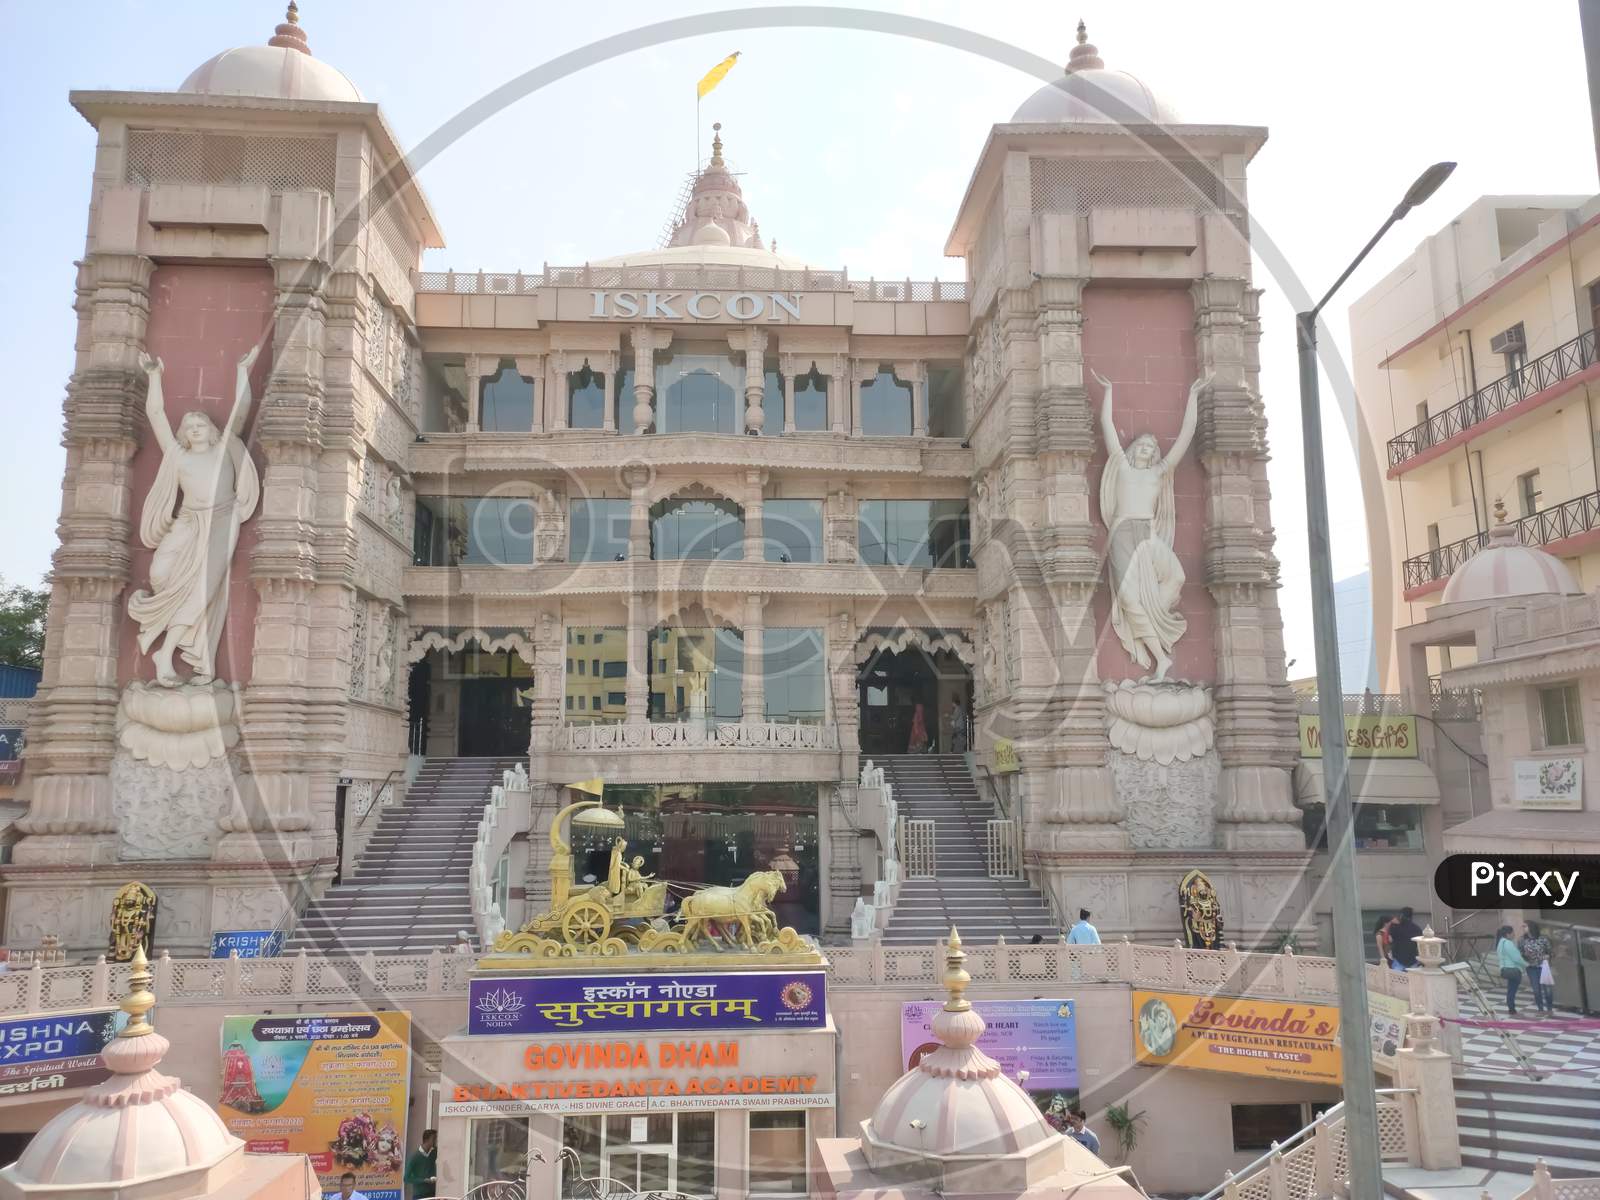 ISKCON Temple Noida (International Society for Krishna Consciousnes) known colloquially as the Hare Krishna movement, ISKCON was founded in 1966 in New York City.